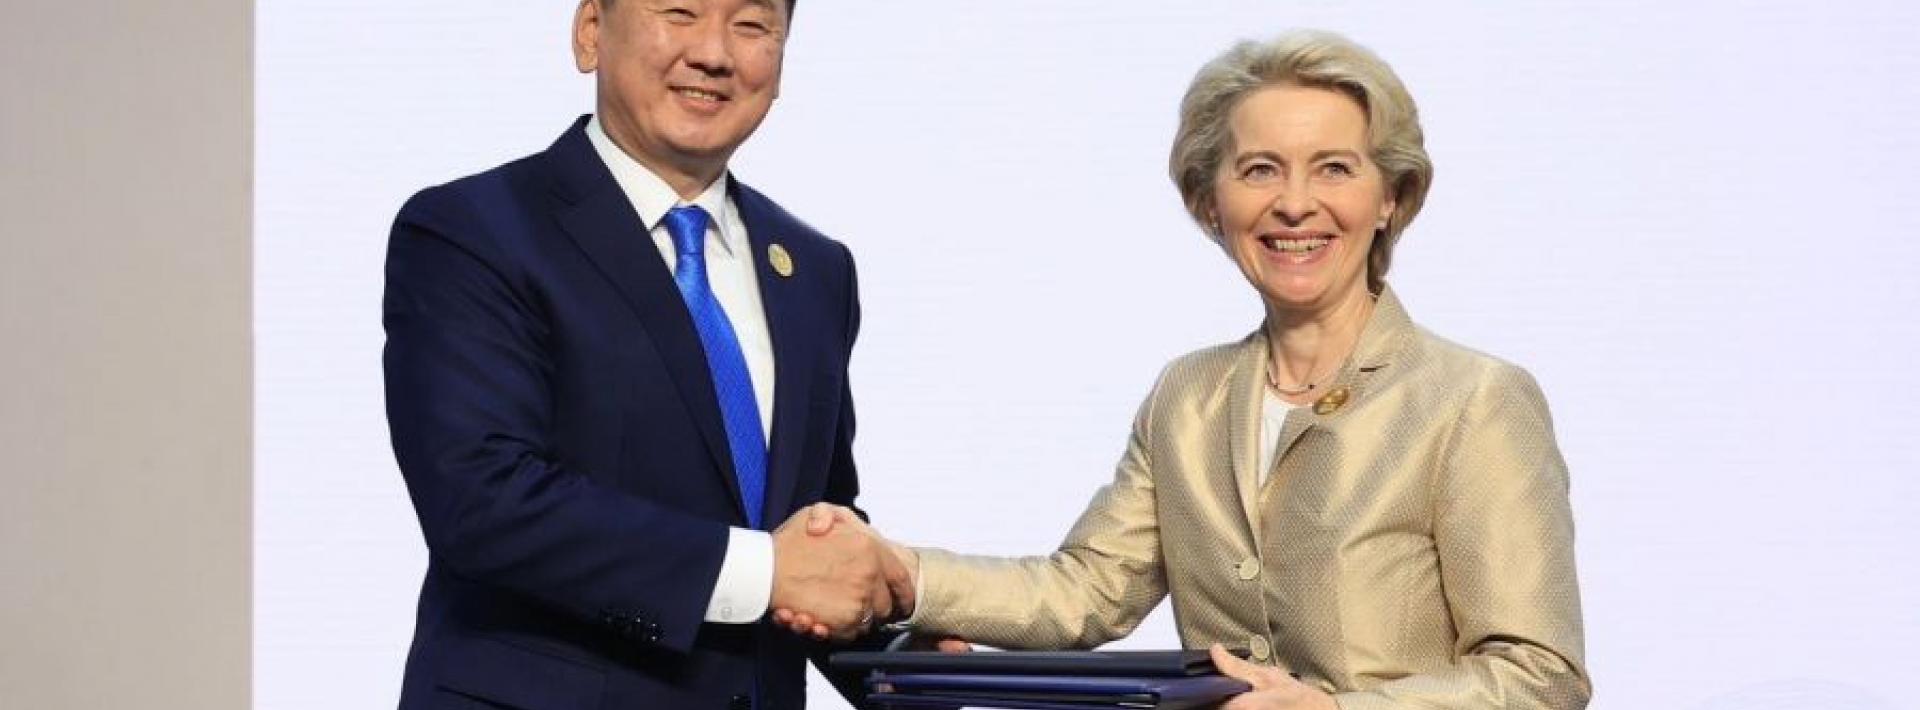 mongolian president shaking hands with european commission president